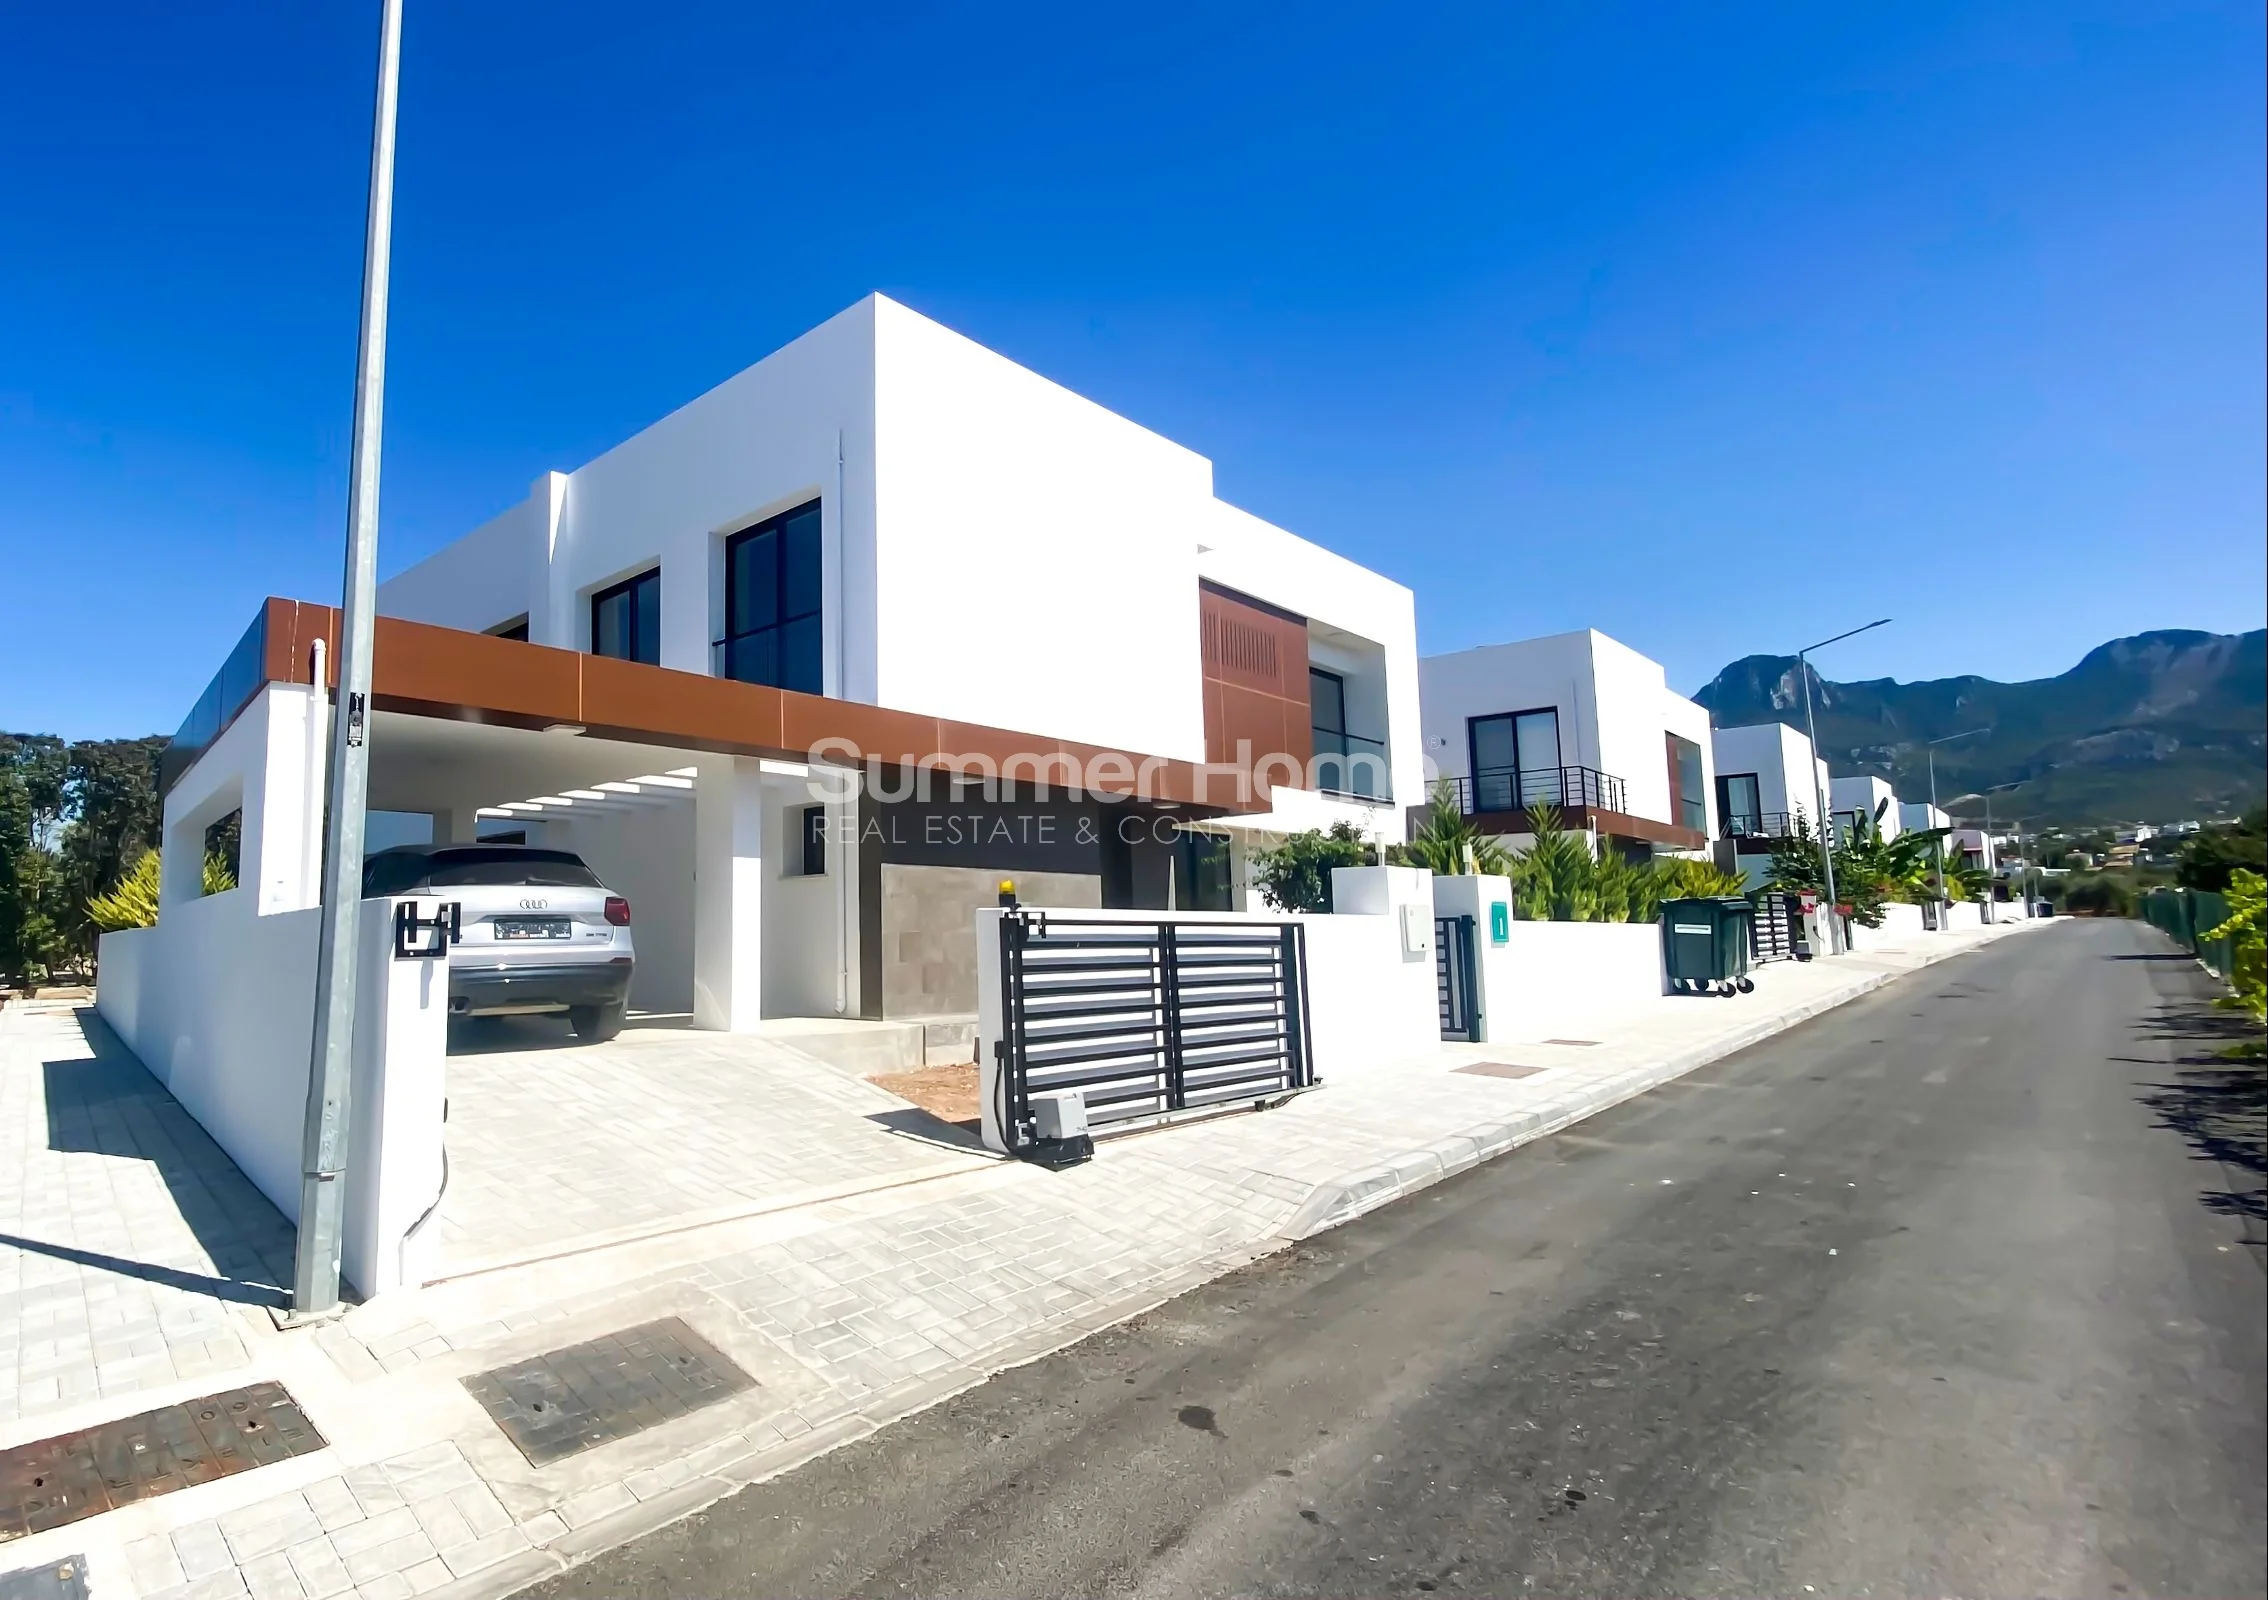 Recently completed well-located villas in Kyrenia, Cyprus Facilities - 28